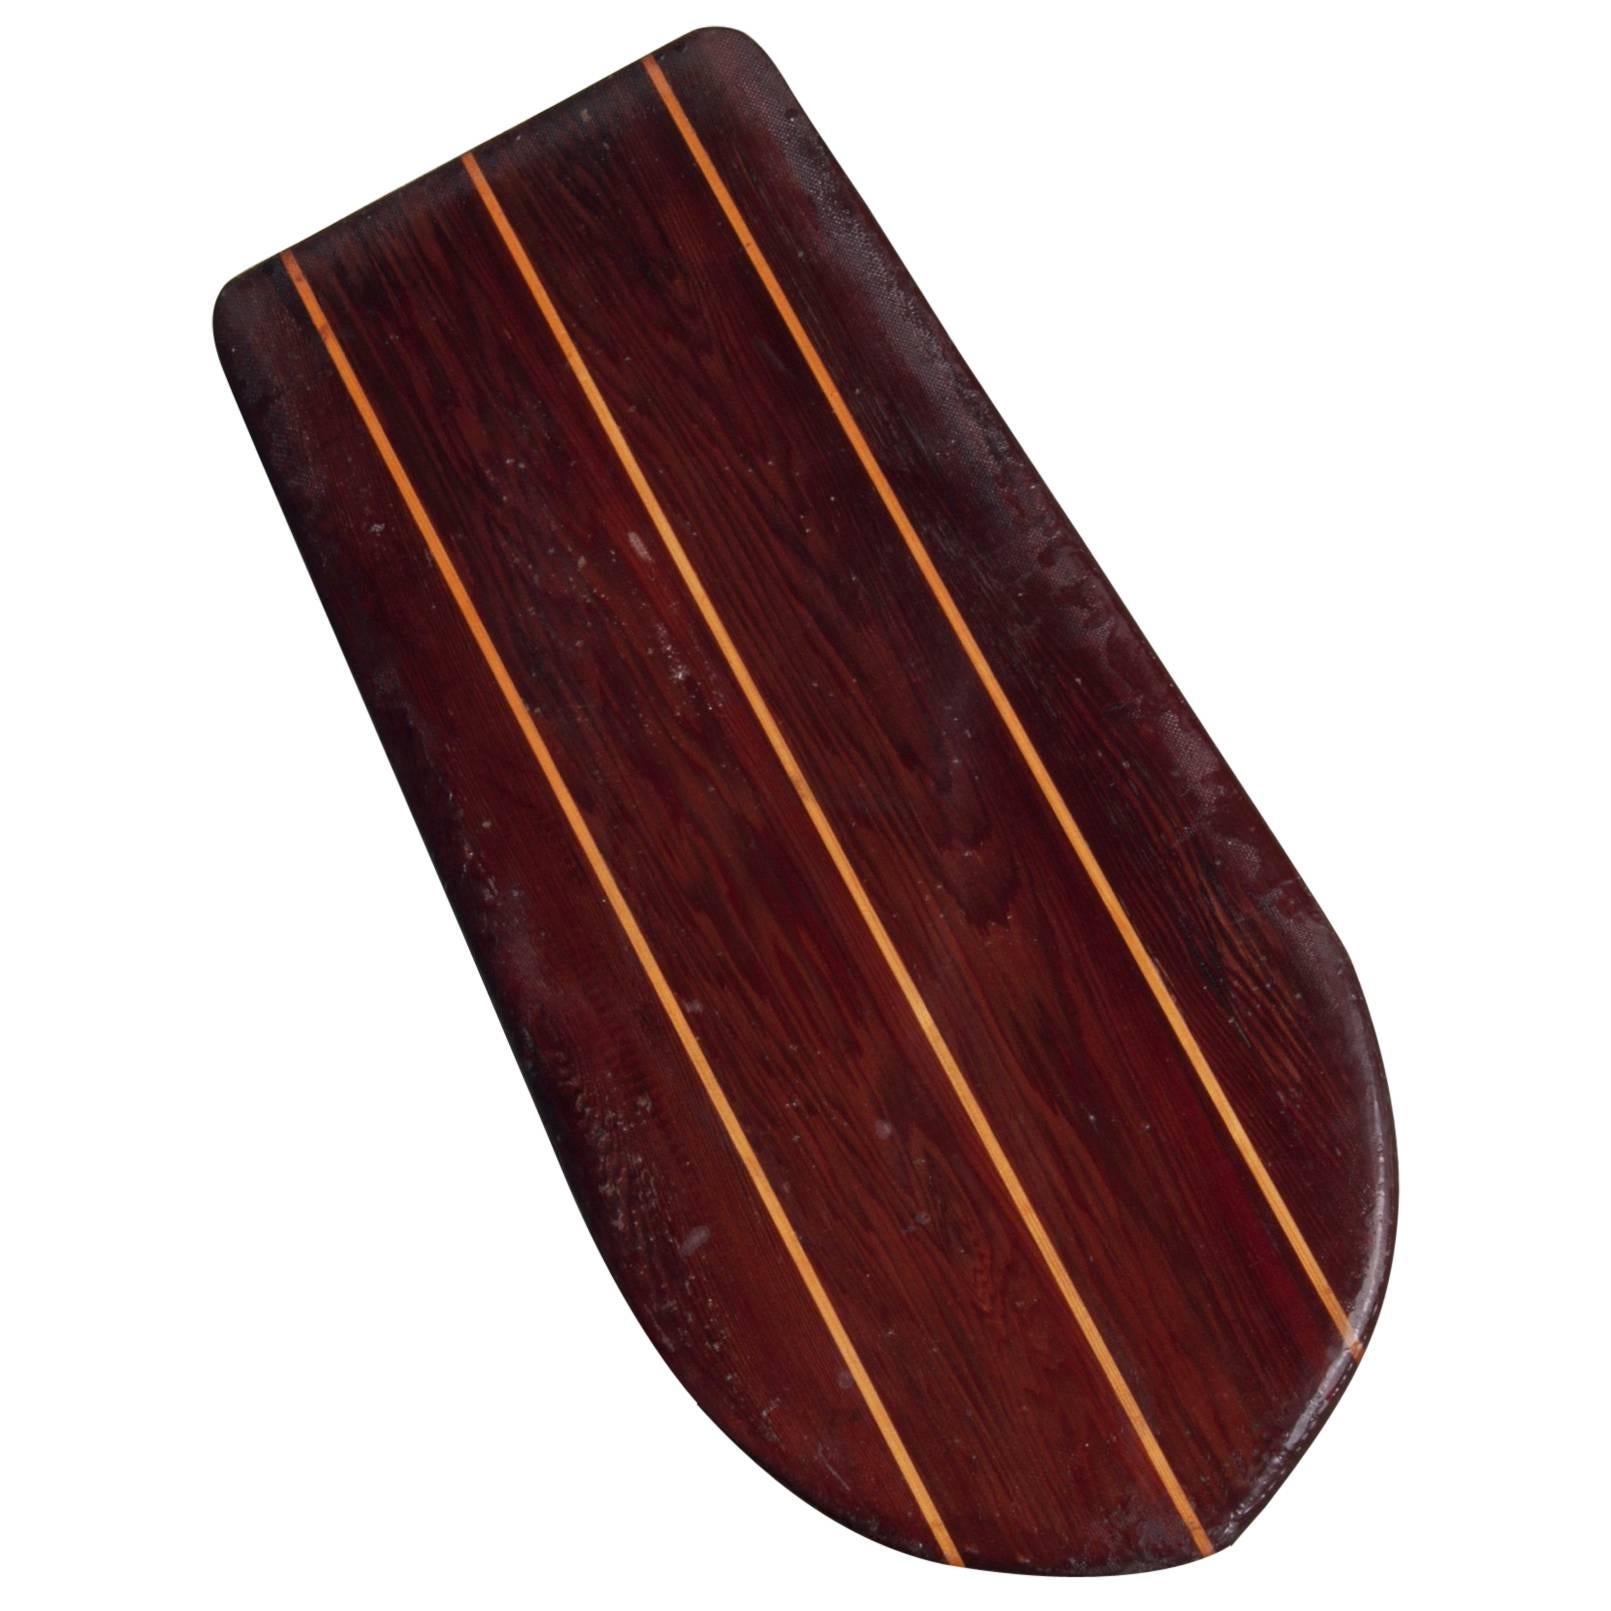 Redwood Twin-Fin Belly Board with Hardwood Stingers, circa 1950 For Sale